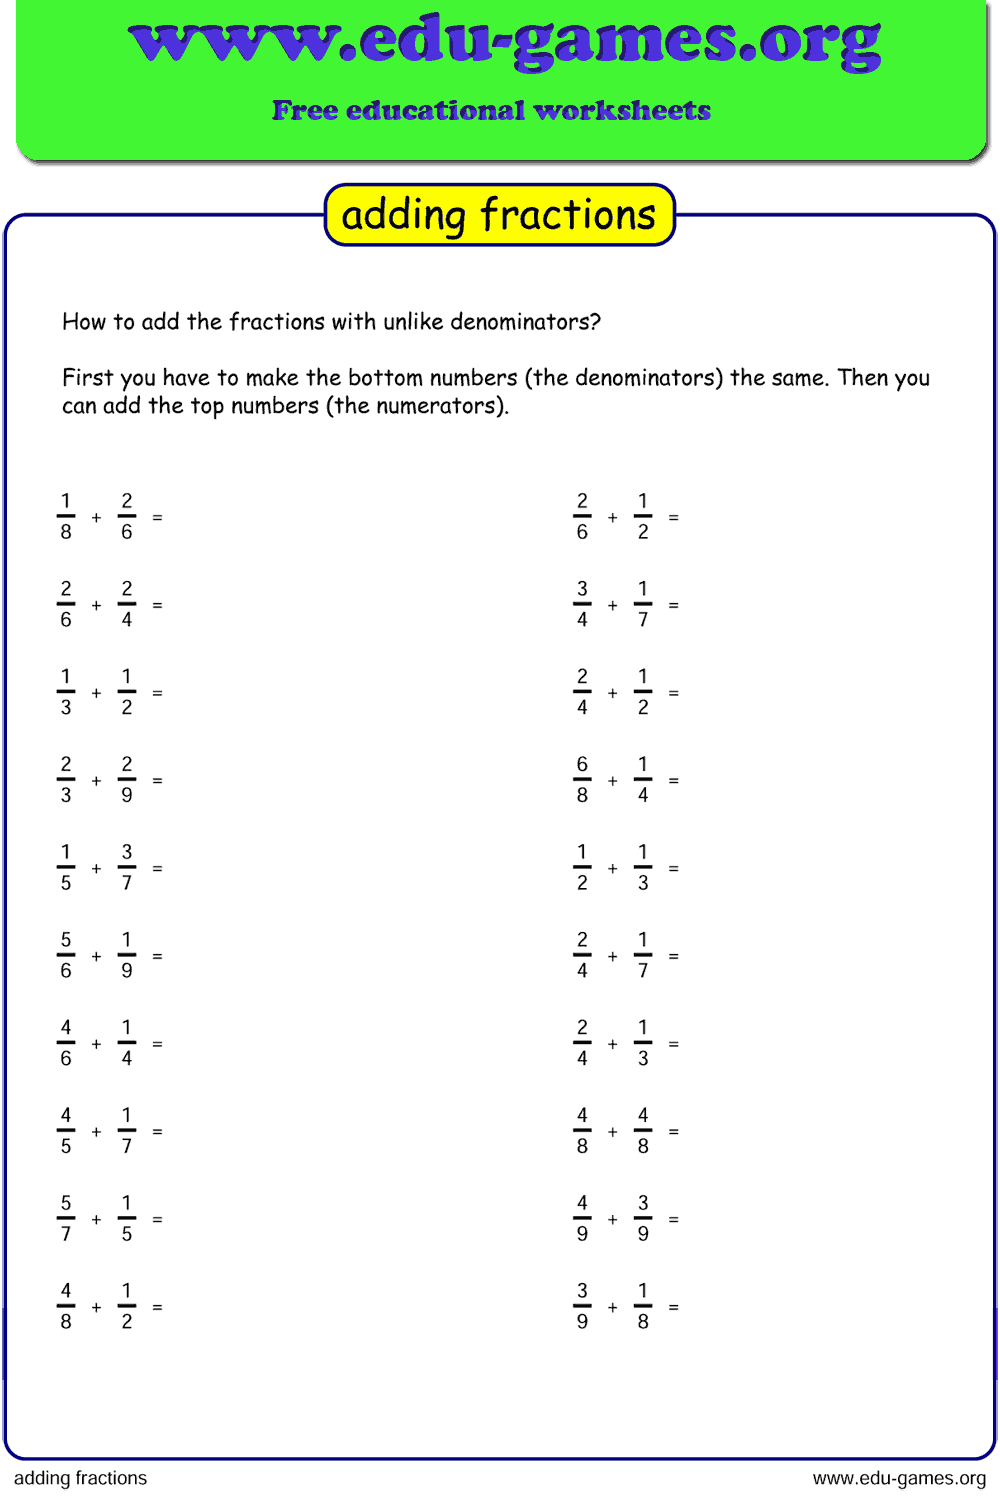 problems solving in adding fractions